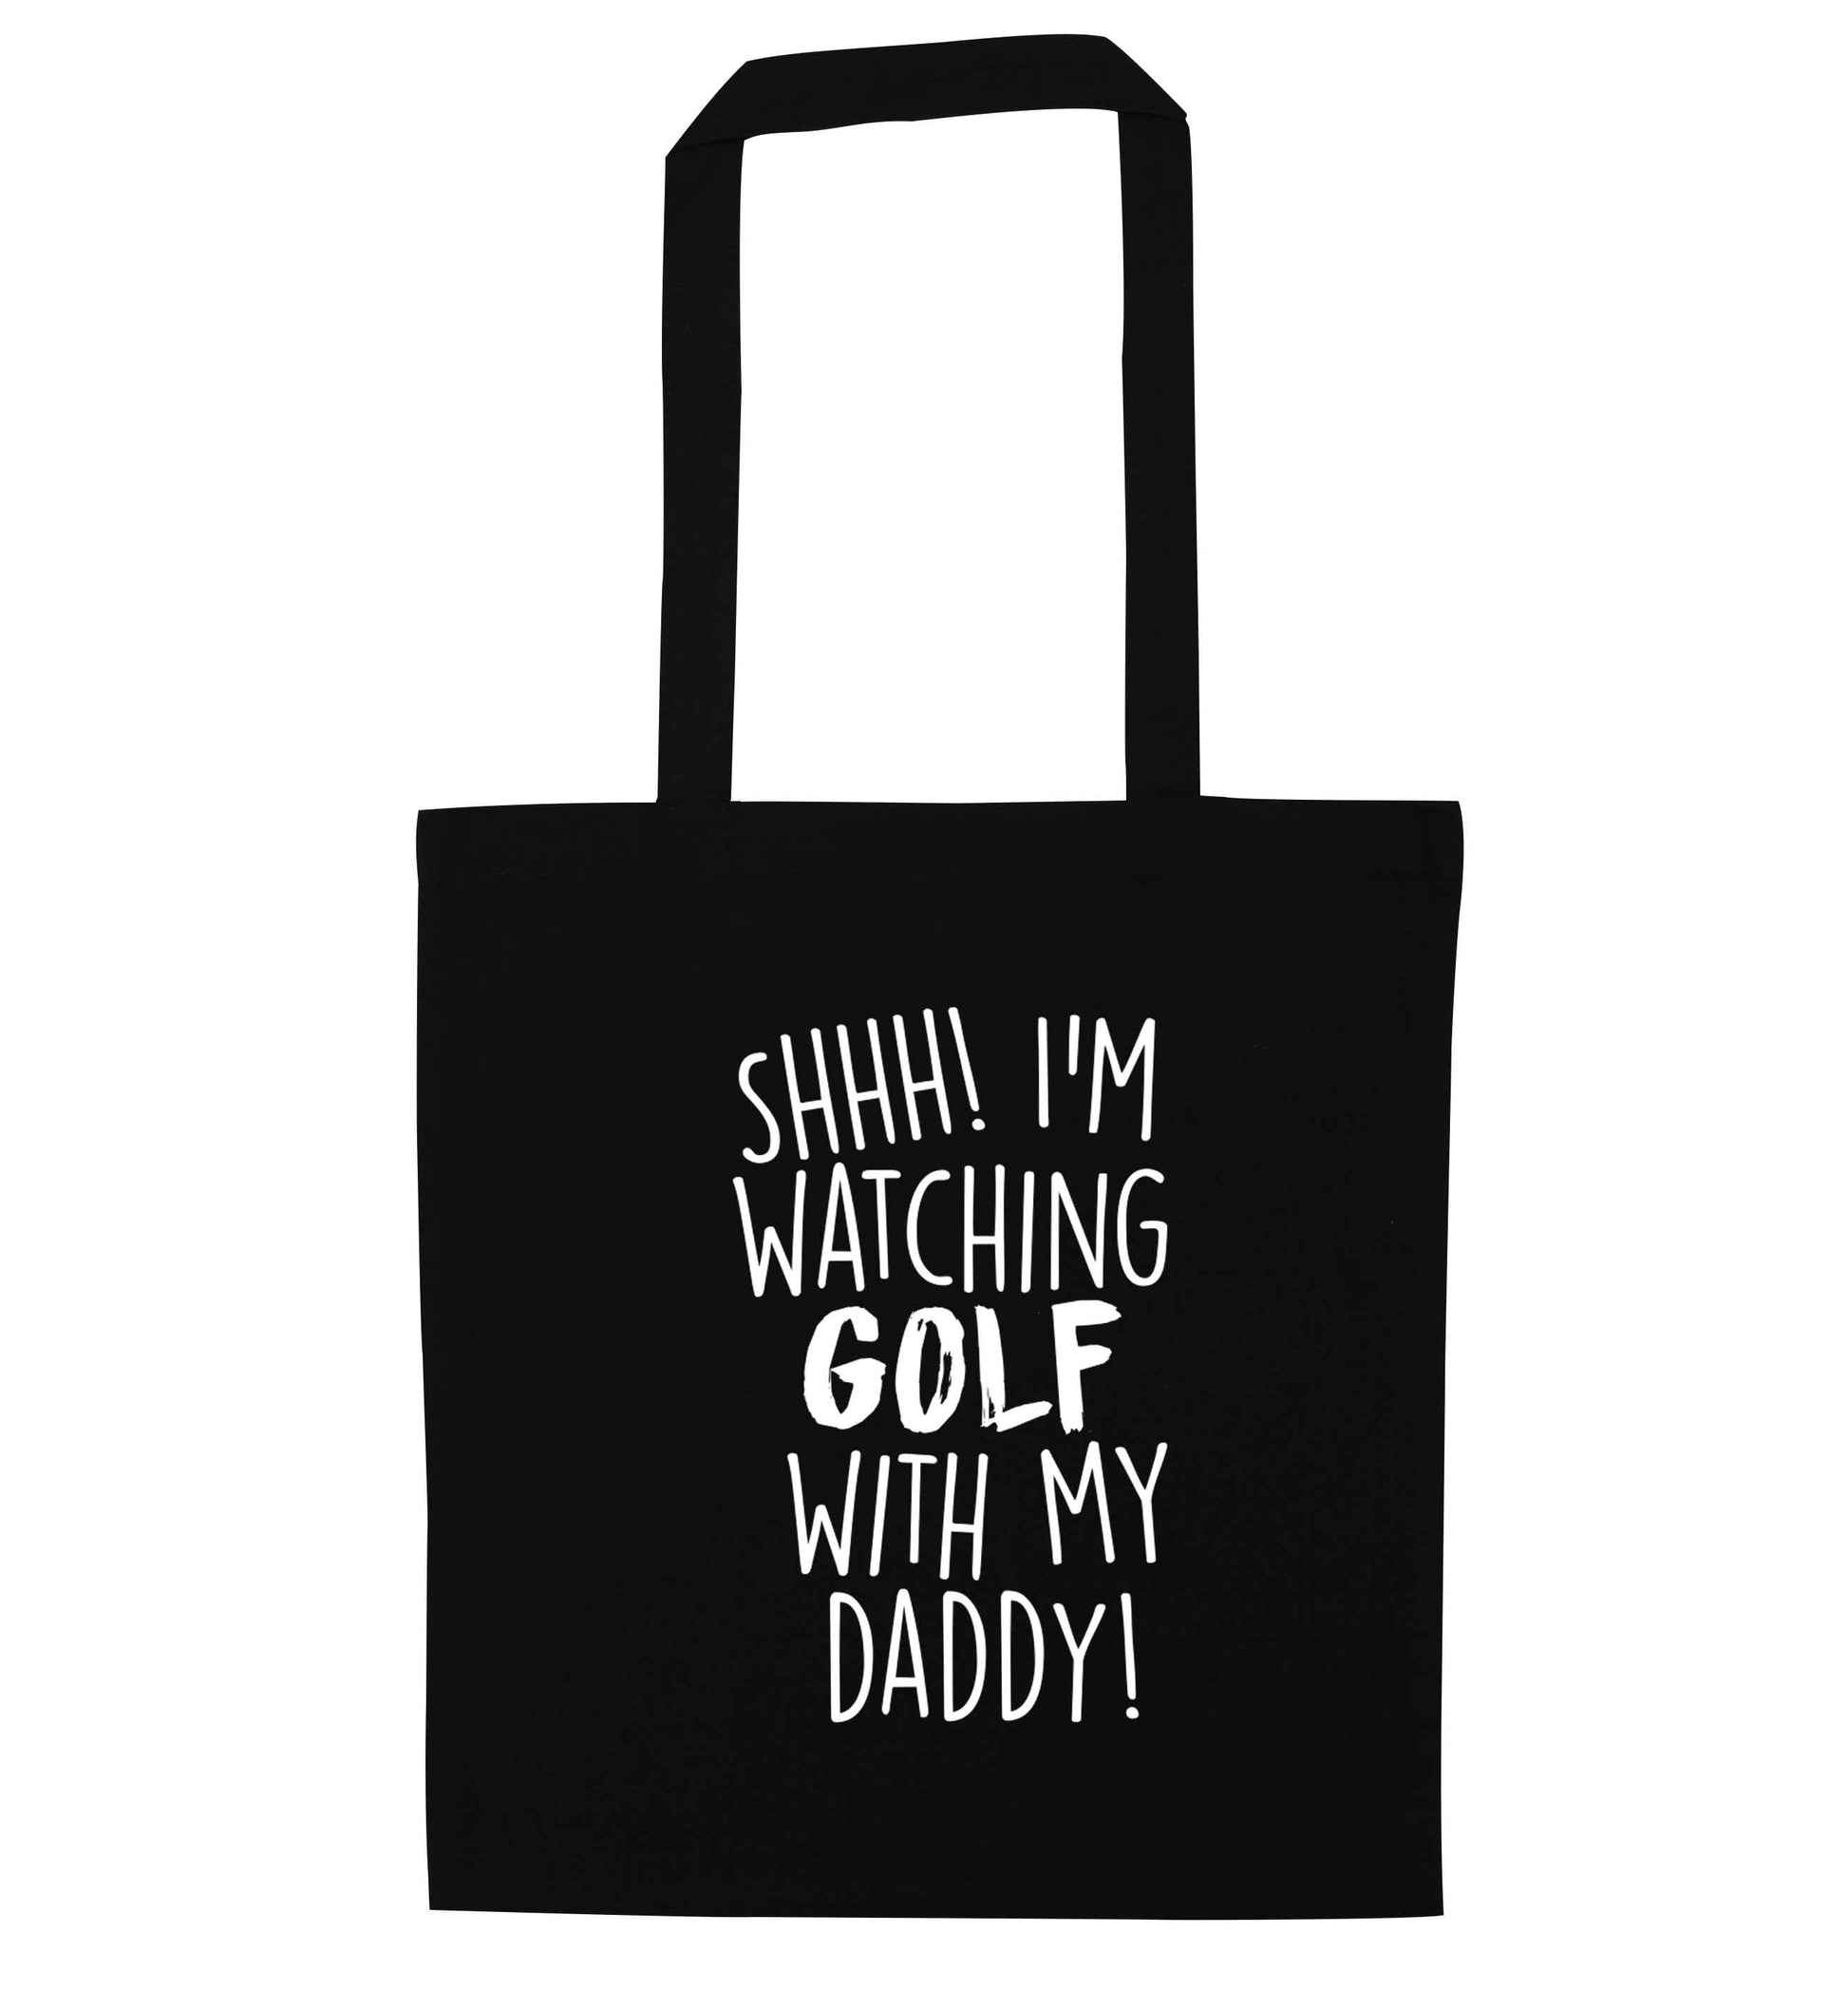 Shh I'm watching golf with my daddy black tote bag